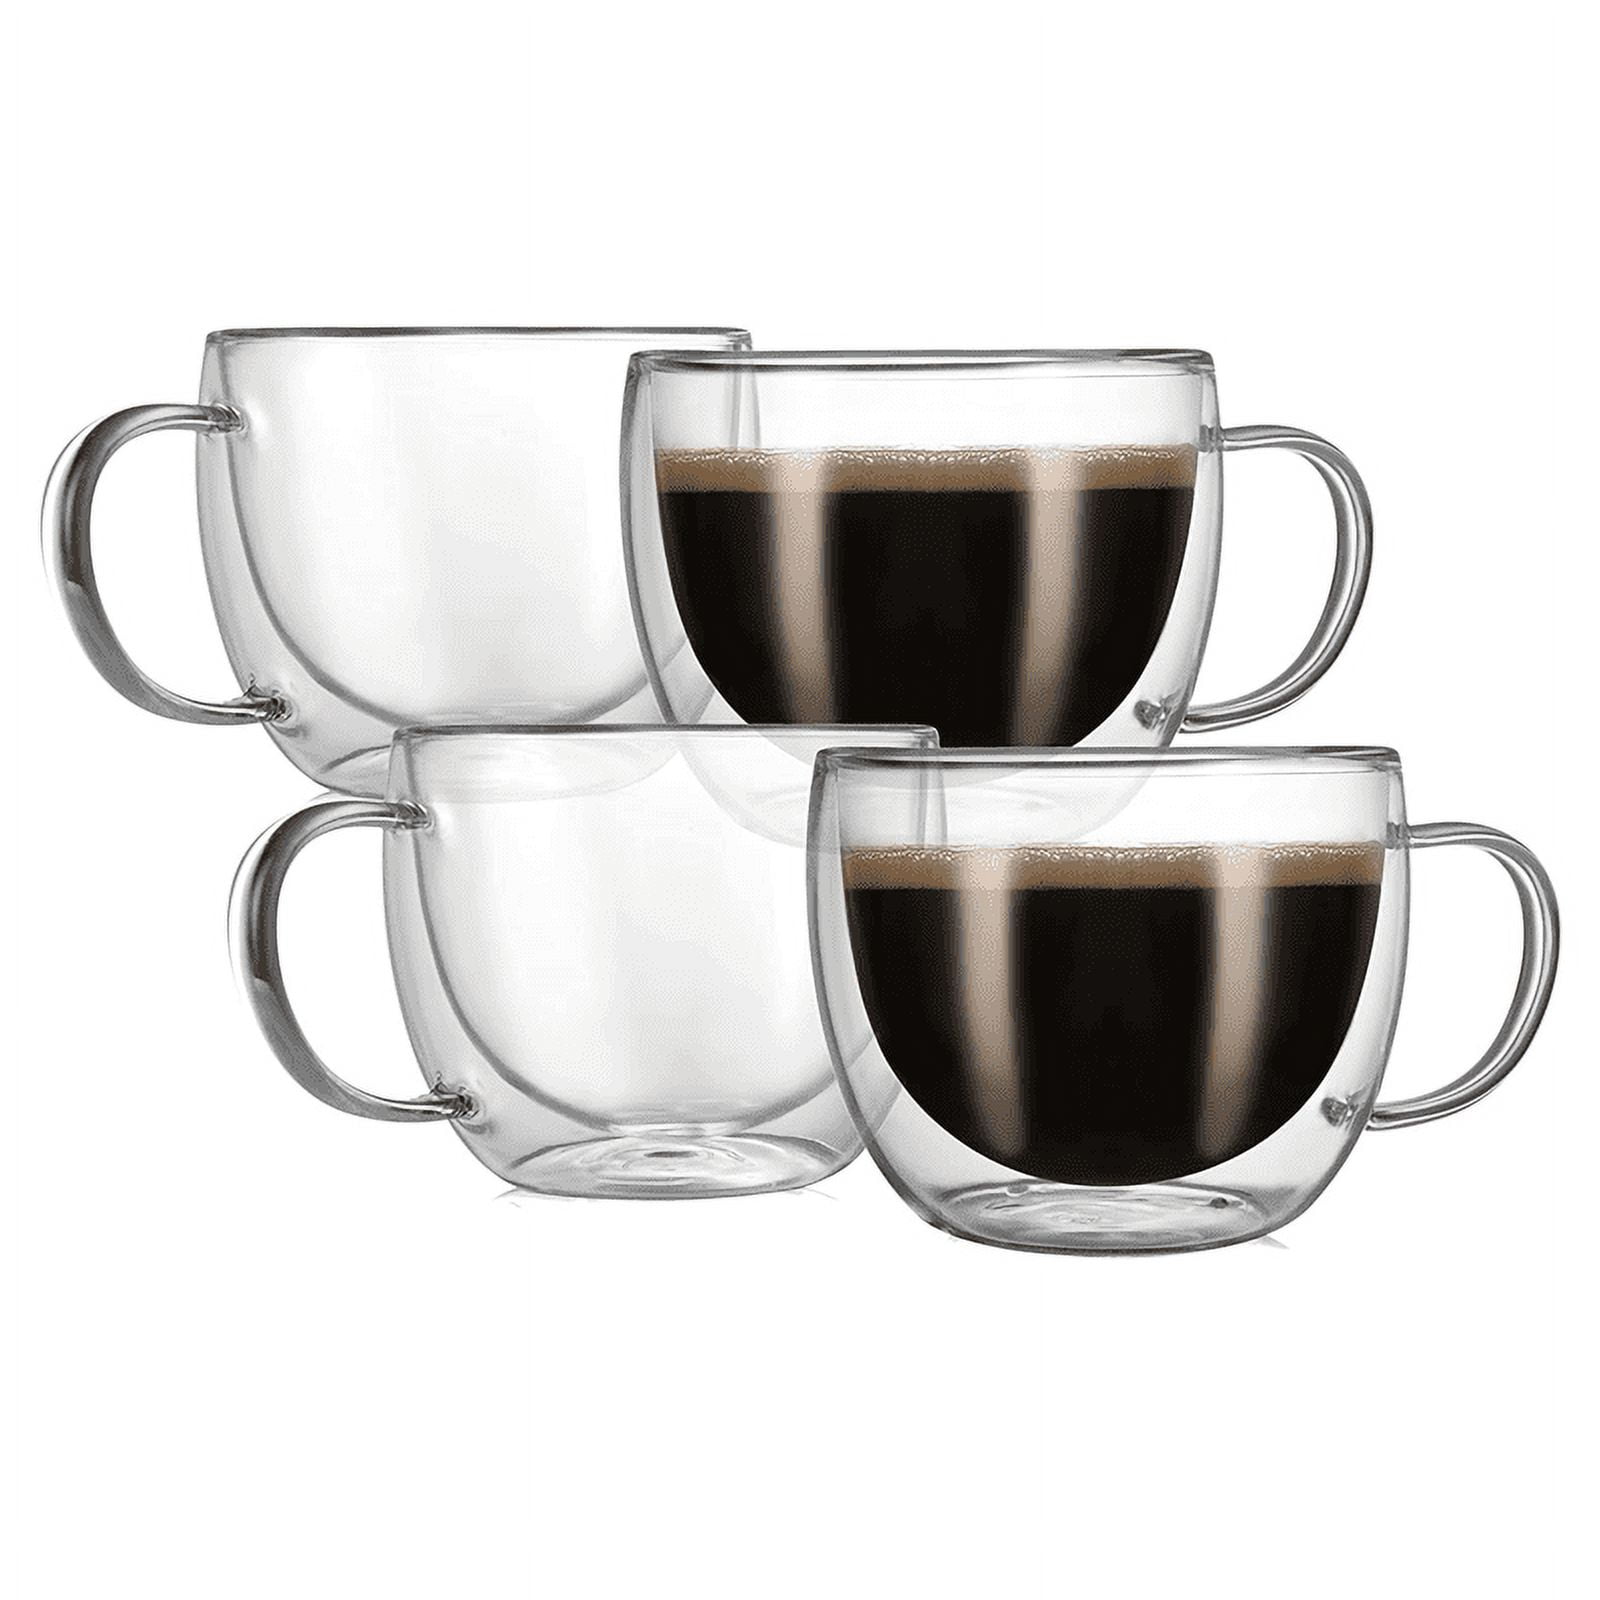 Double-Wall Glass Mug - Lets do Brunch - Slant Collections